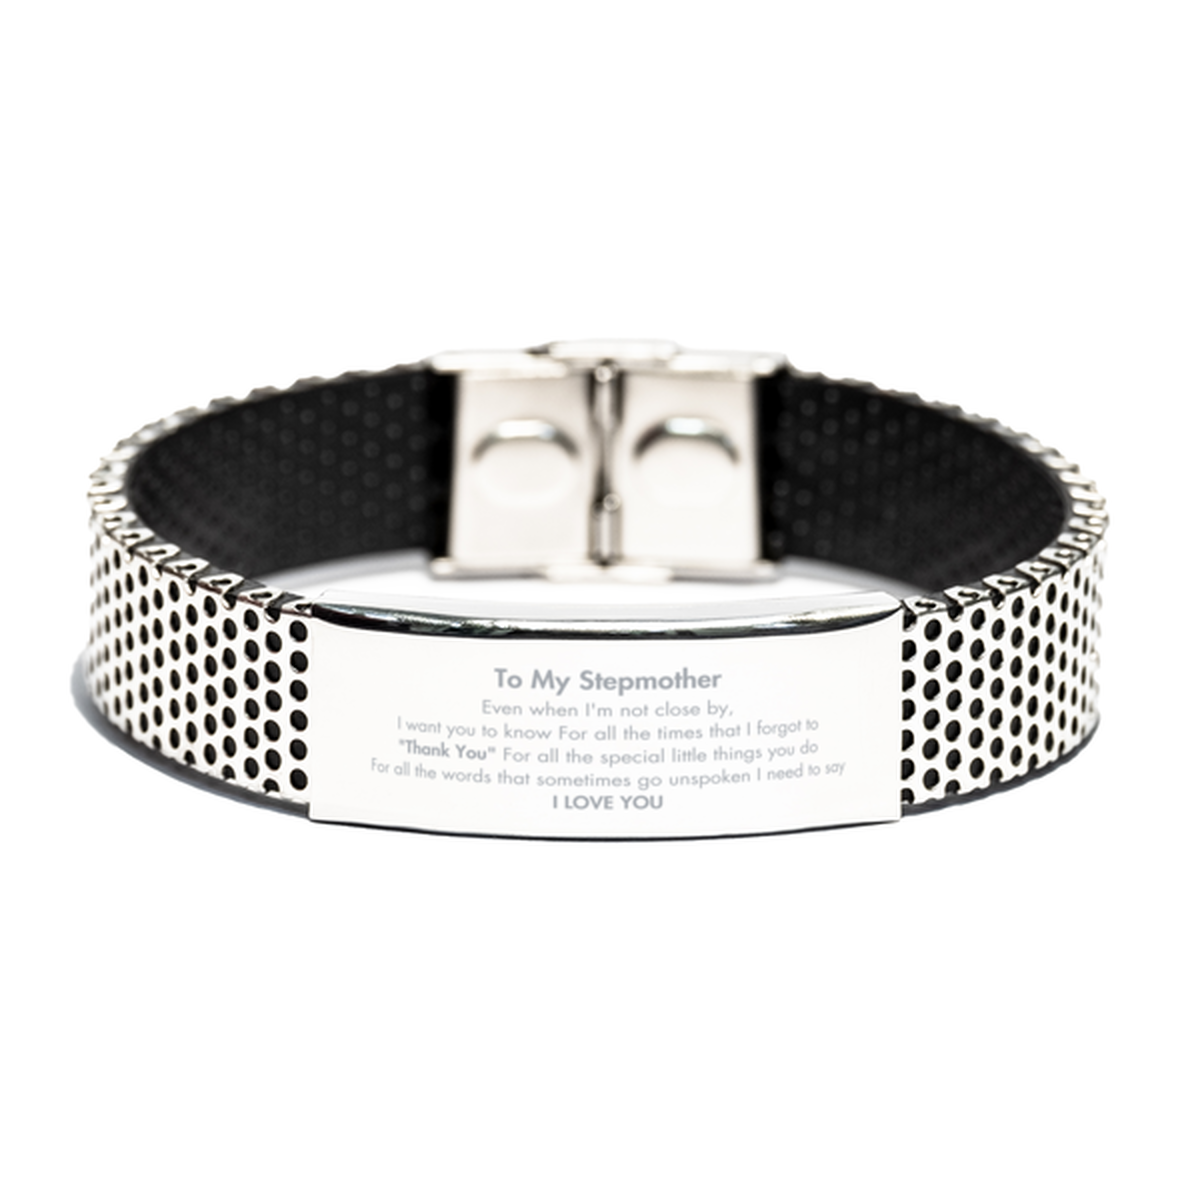 Thank You Gifts for Stepmother, Keepsake Stainless Steel Bracelet Gifts for Stepmother Birthday Mother's day Father's Day Stepmother For all the words That sometimes go unspoken I need to say I LOVE YOU